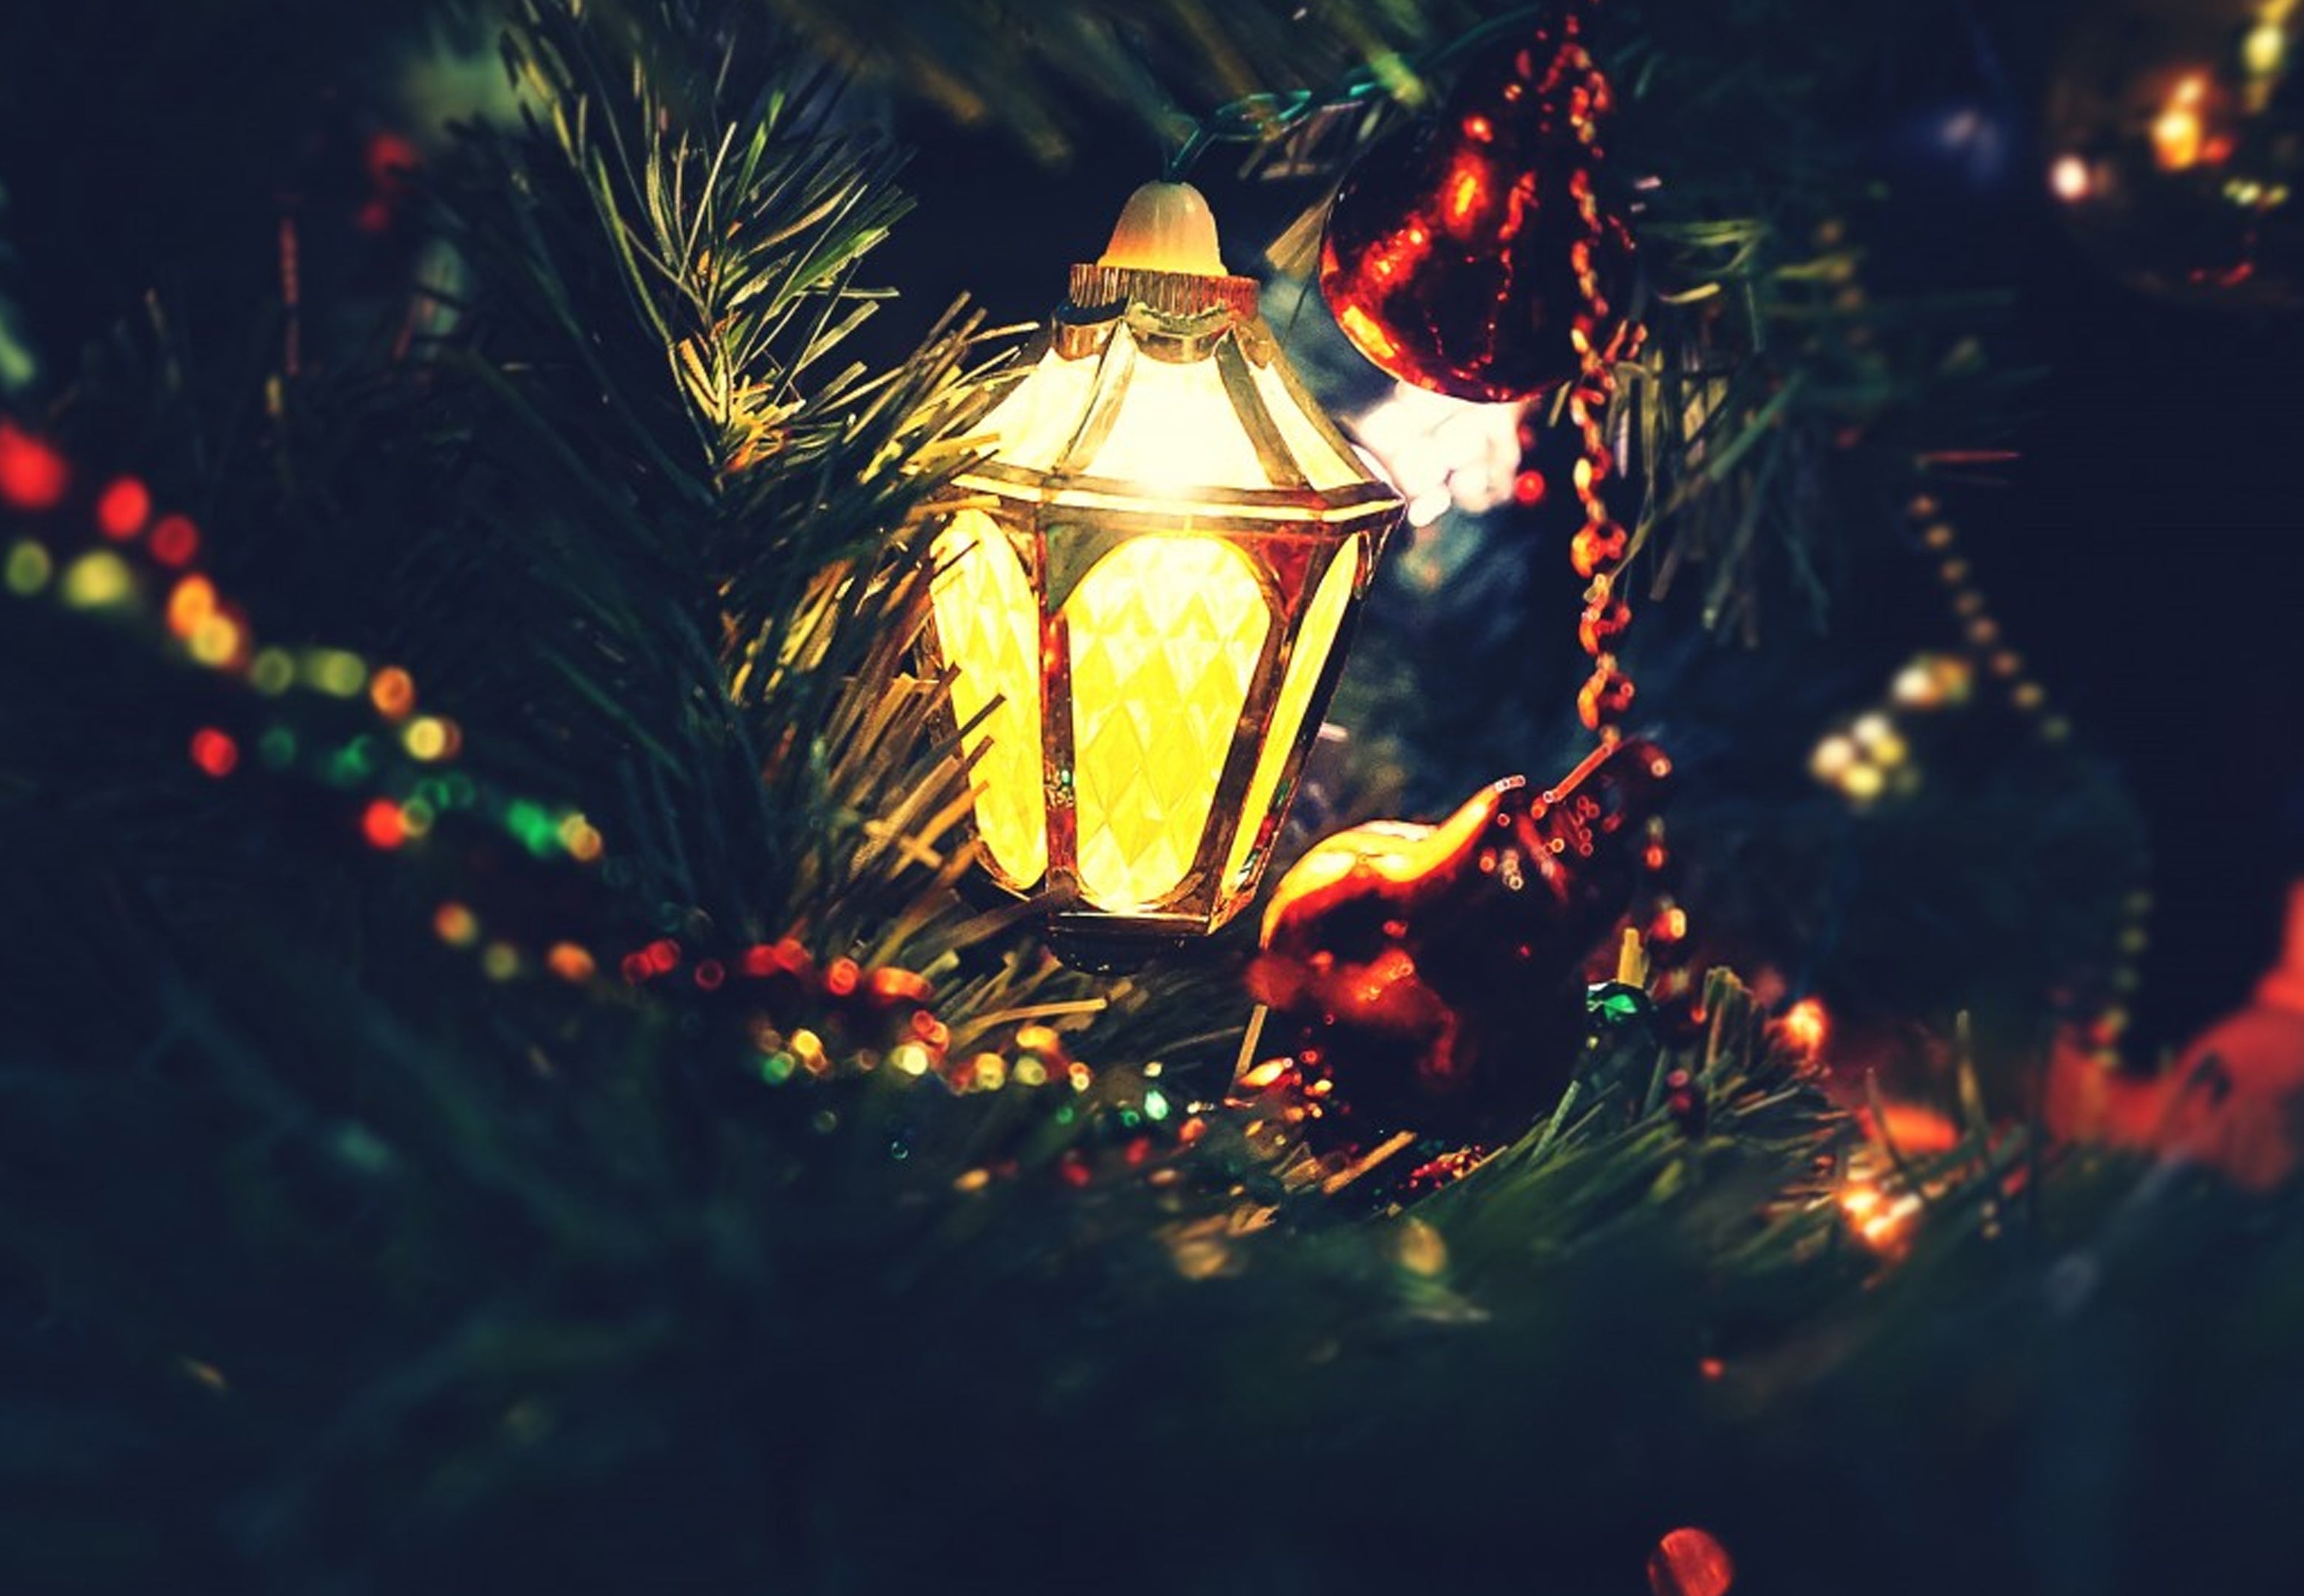 Illuminate Your Holidays: A Guide to Festive LED Lighting for December Celebrations